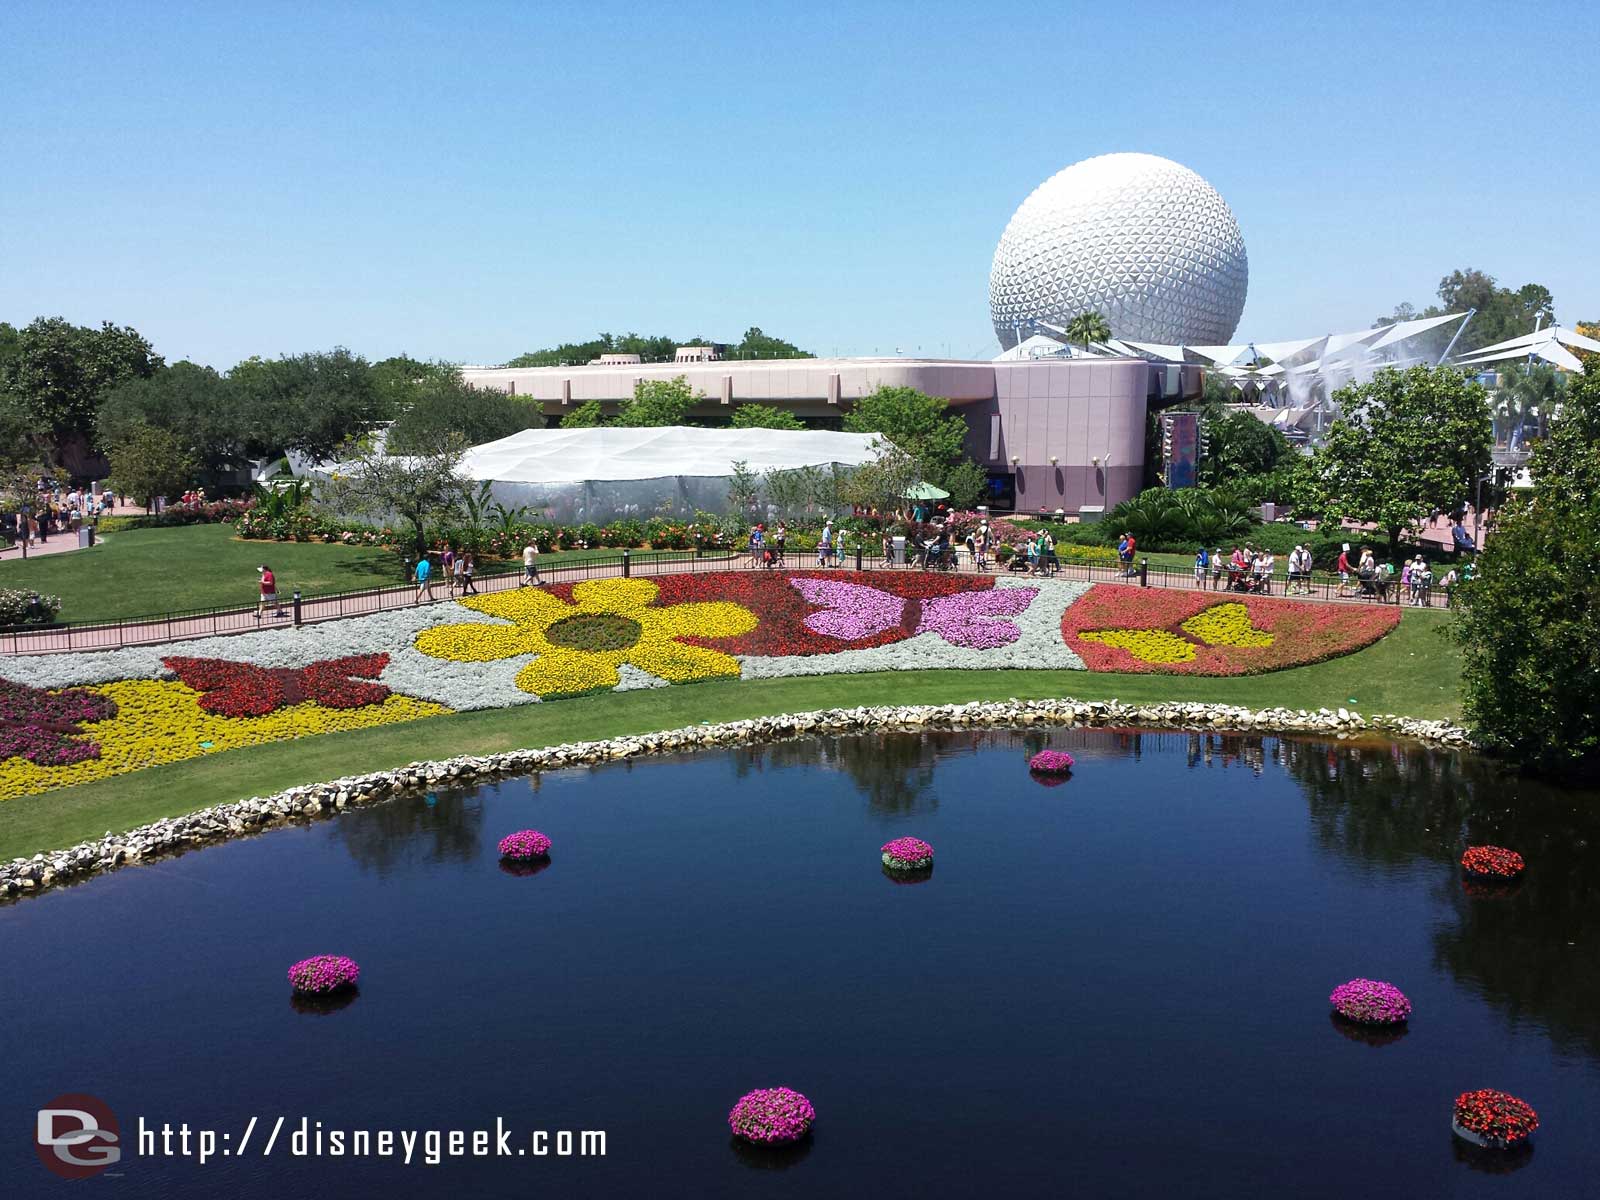 The view from onboard the Monorail of the flower beds with Spaceship Earth in the background - Epcot International Flower & Garden Festival